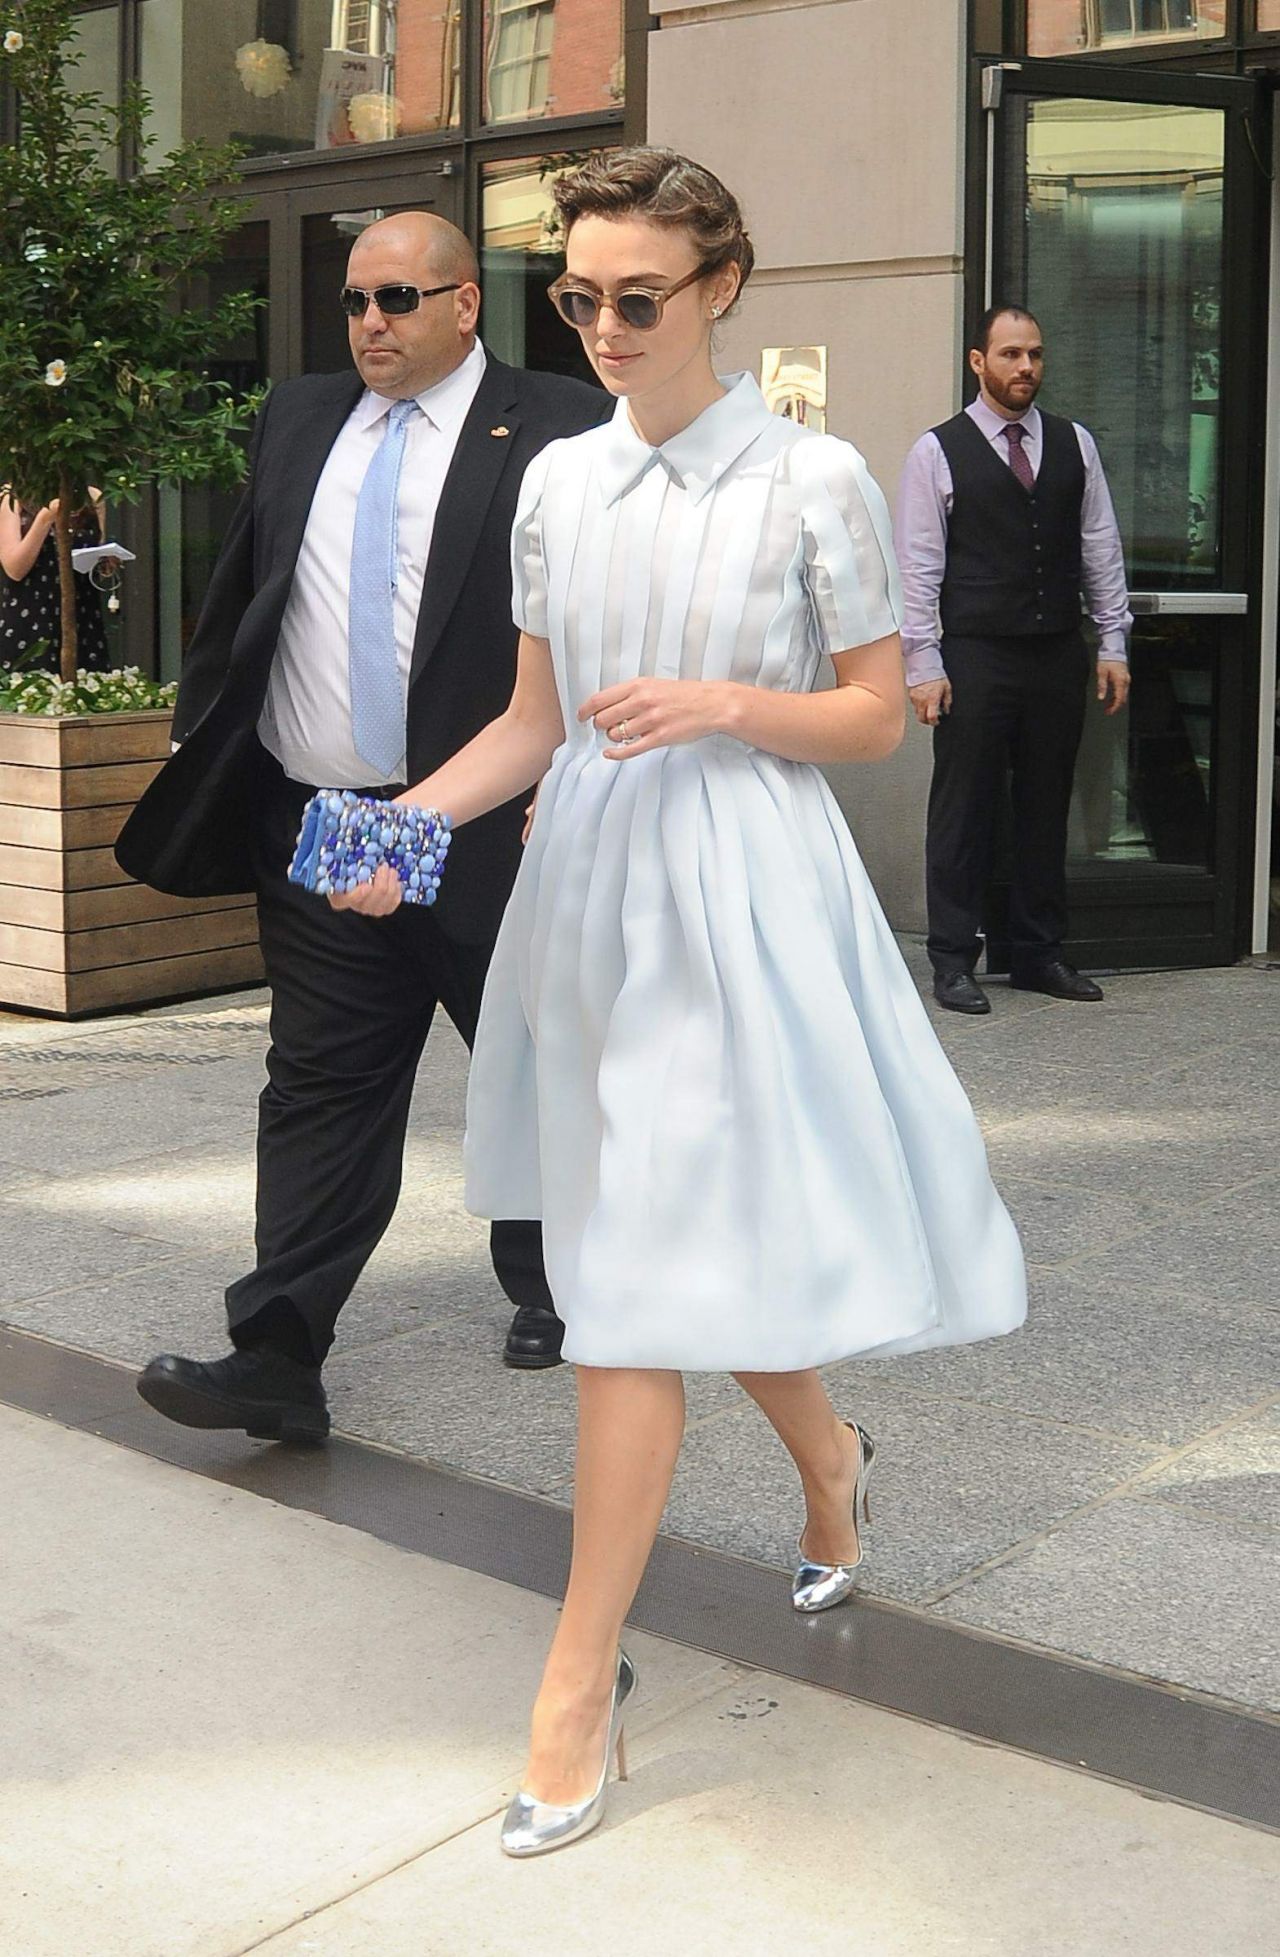 Keira Knightley Wearing Prada Dress - Arriving at Downtown Hotel in New ...